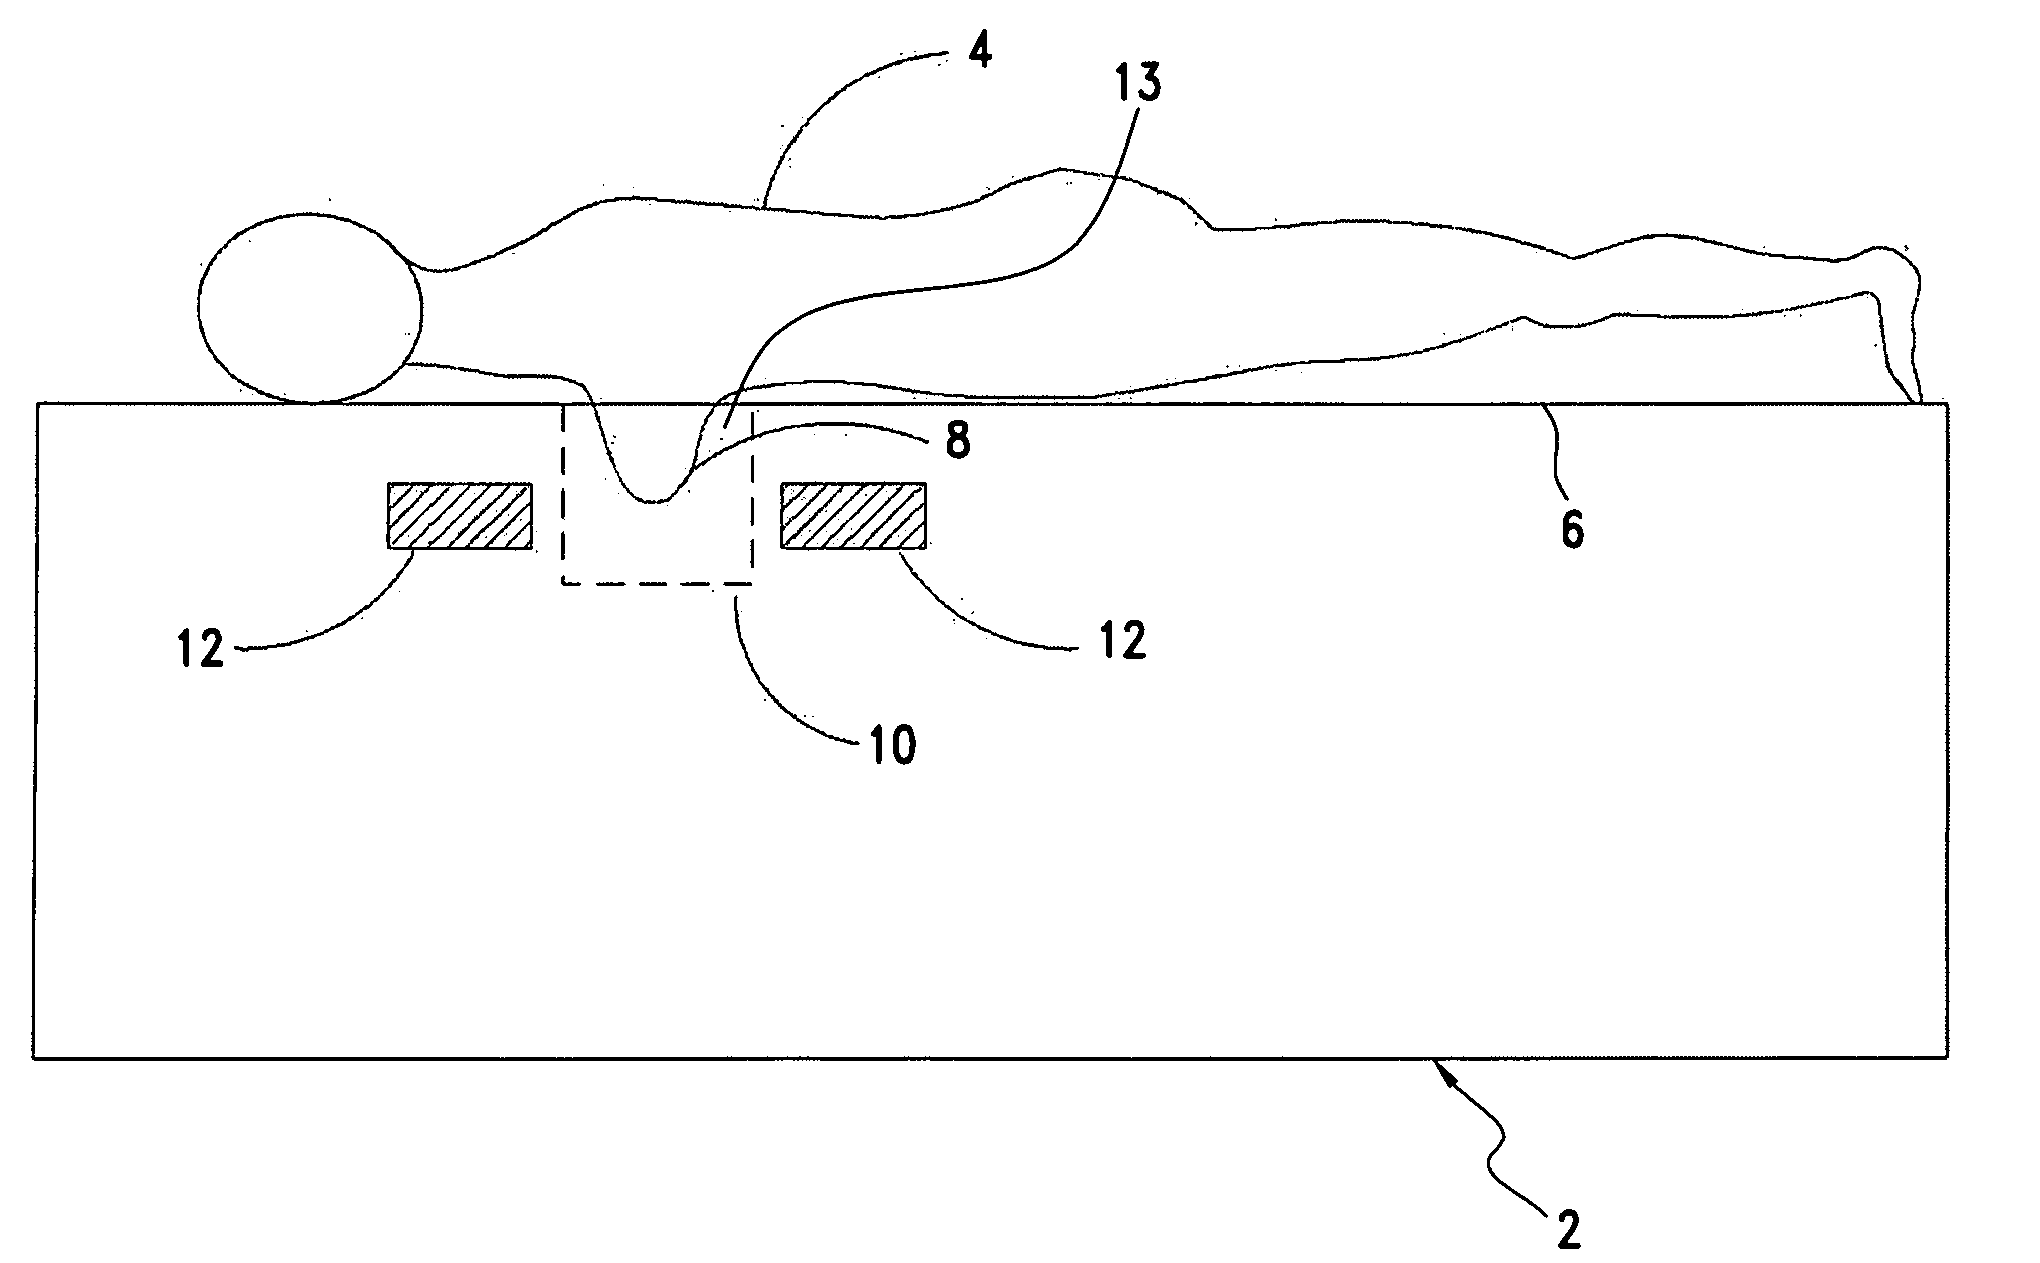 Laser imaging apparatus with variable patient positioning